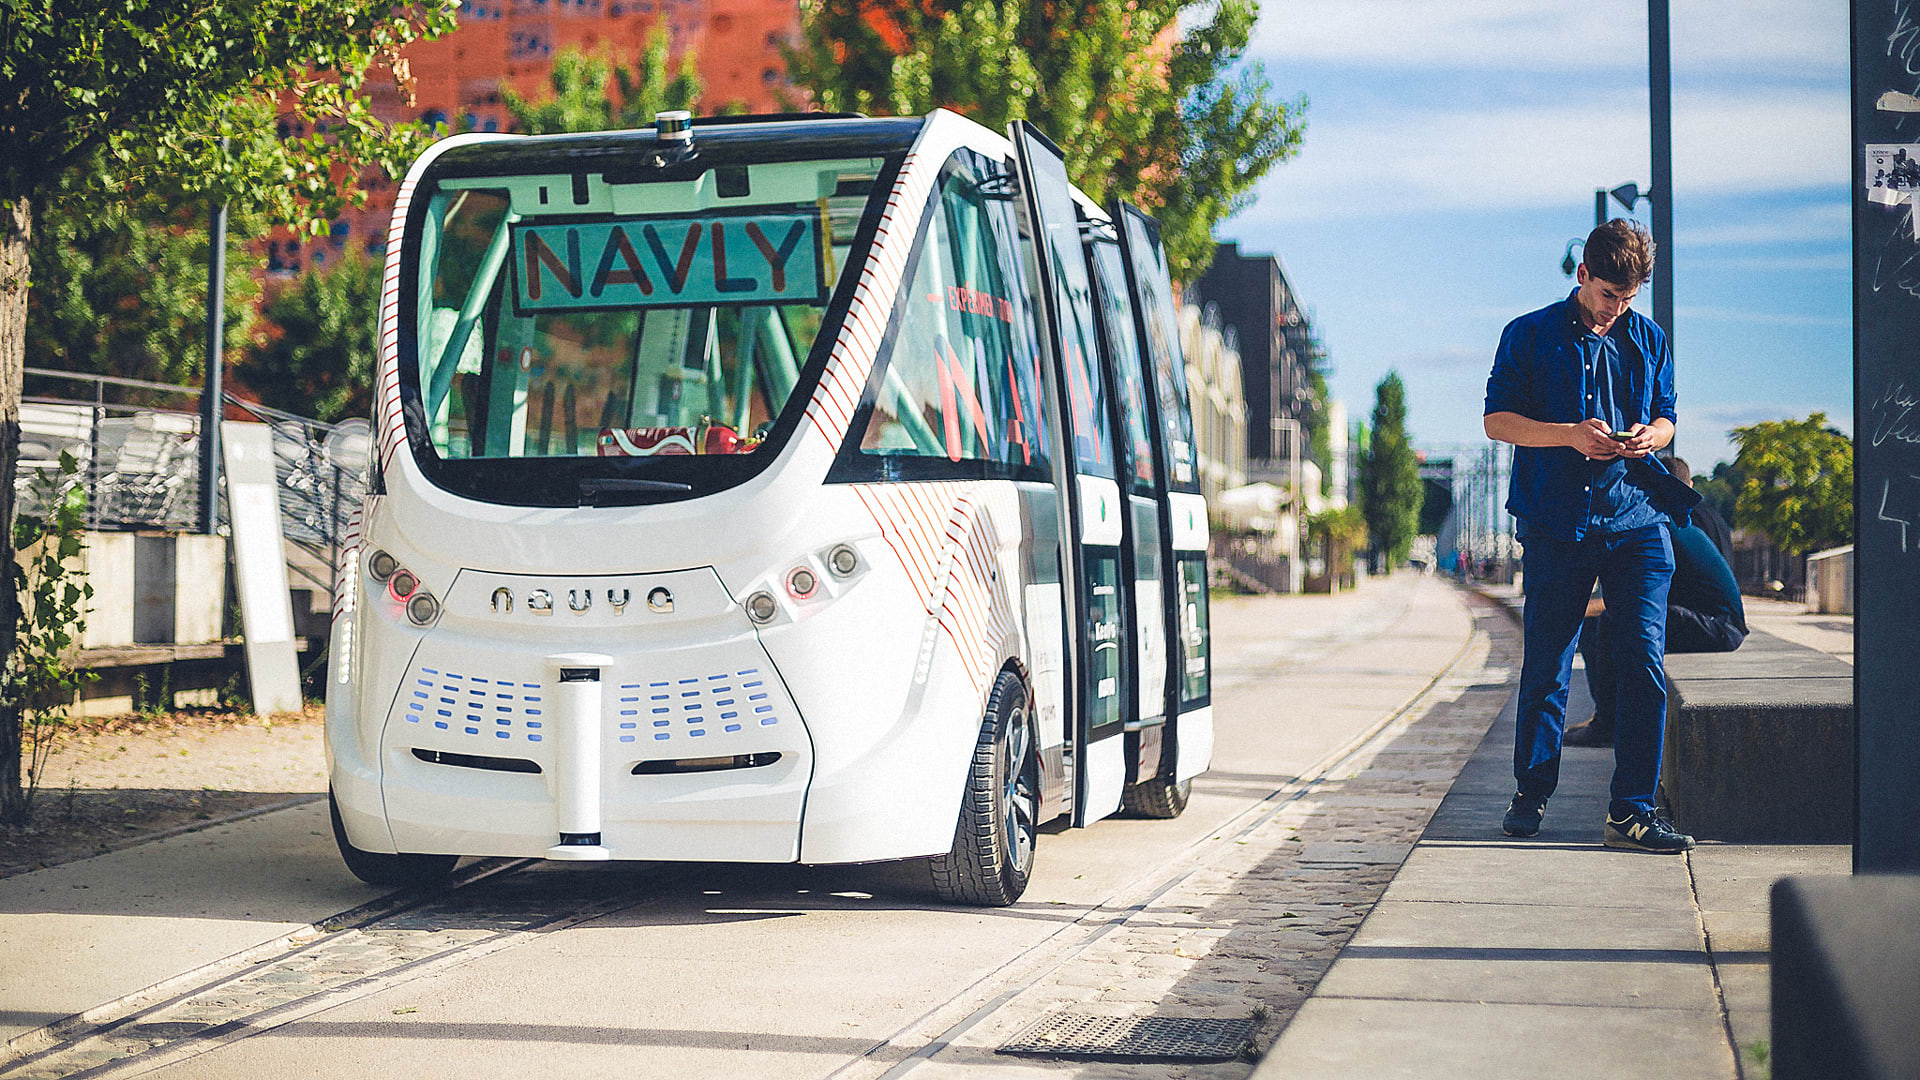 Automated Buses Are Here, Now We Have To Decide How They Will Reshape Our Cities